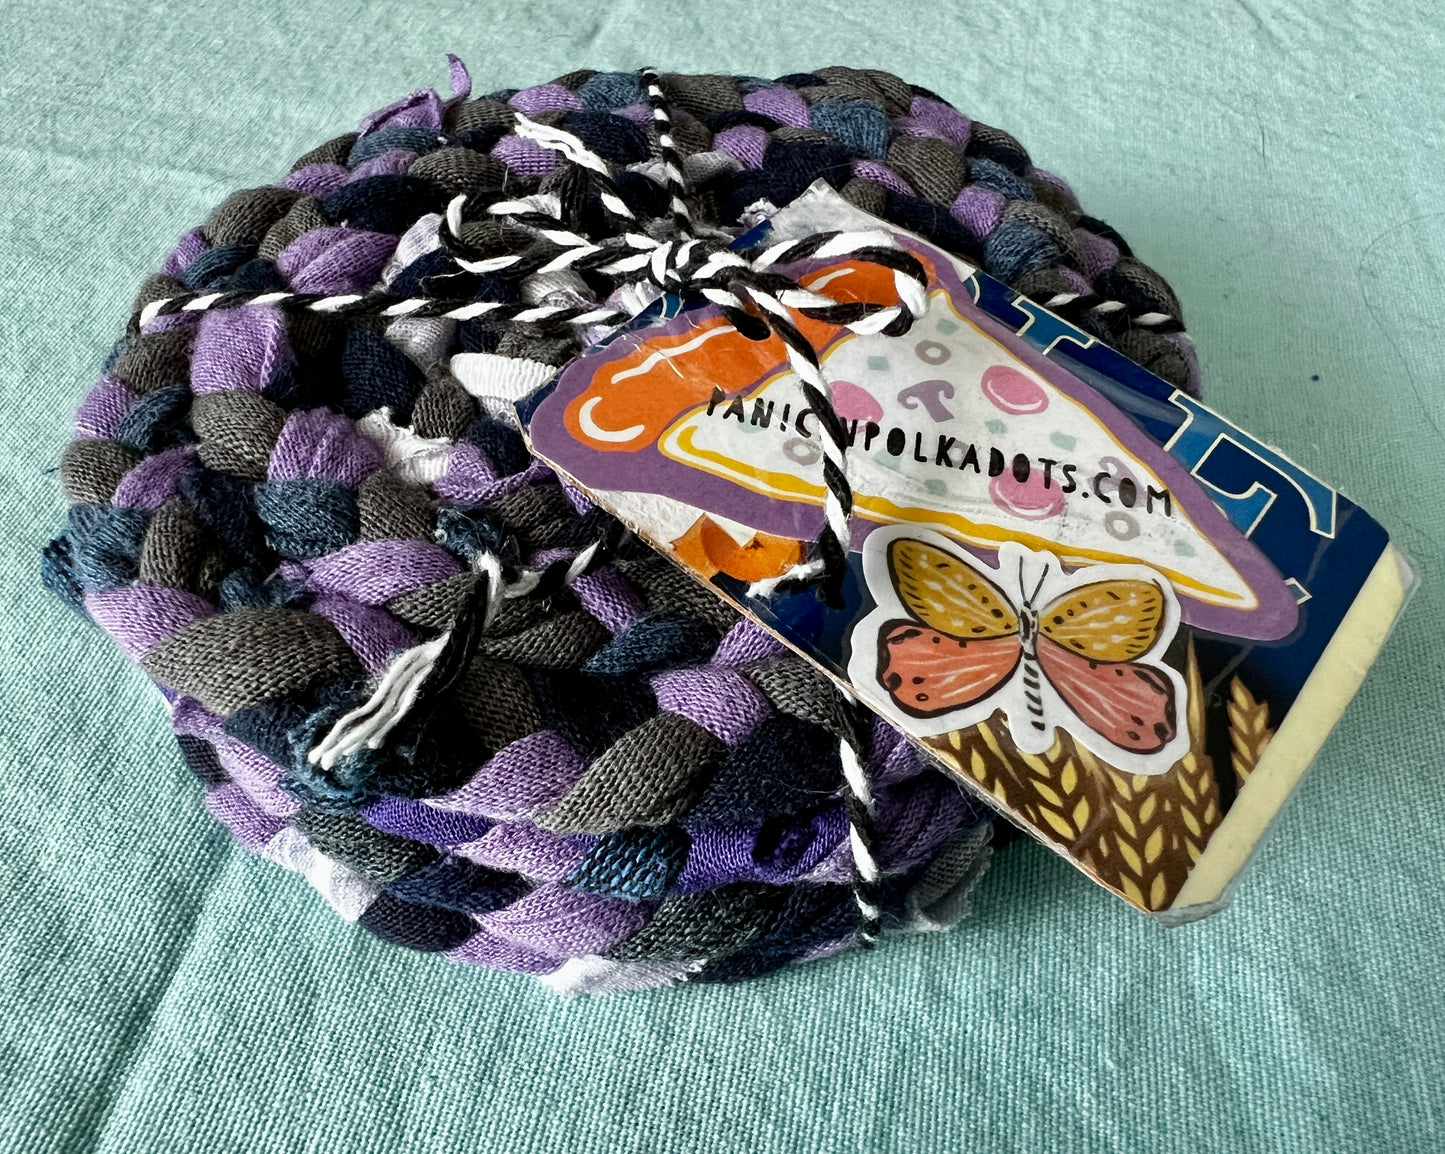 purple coaster set stack bundled together with string, Panic in Polkadots tag